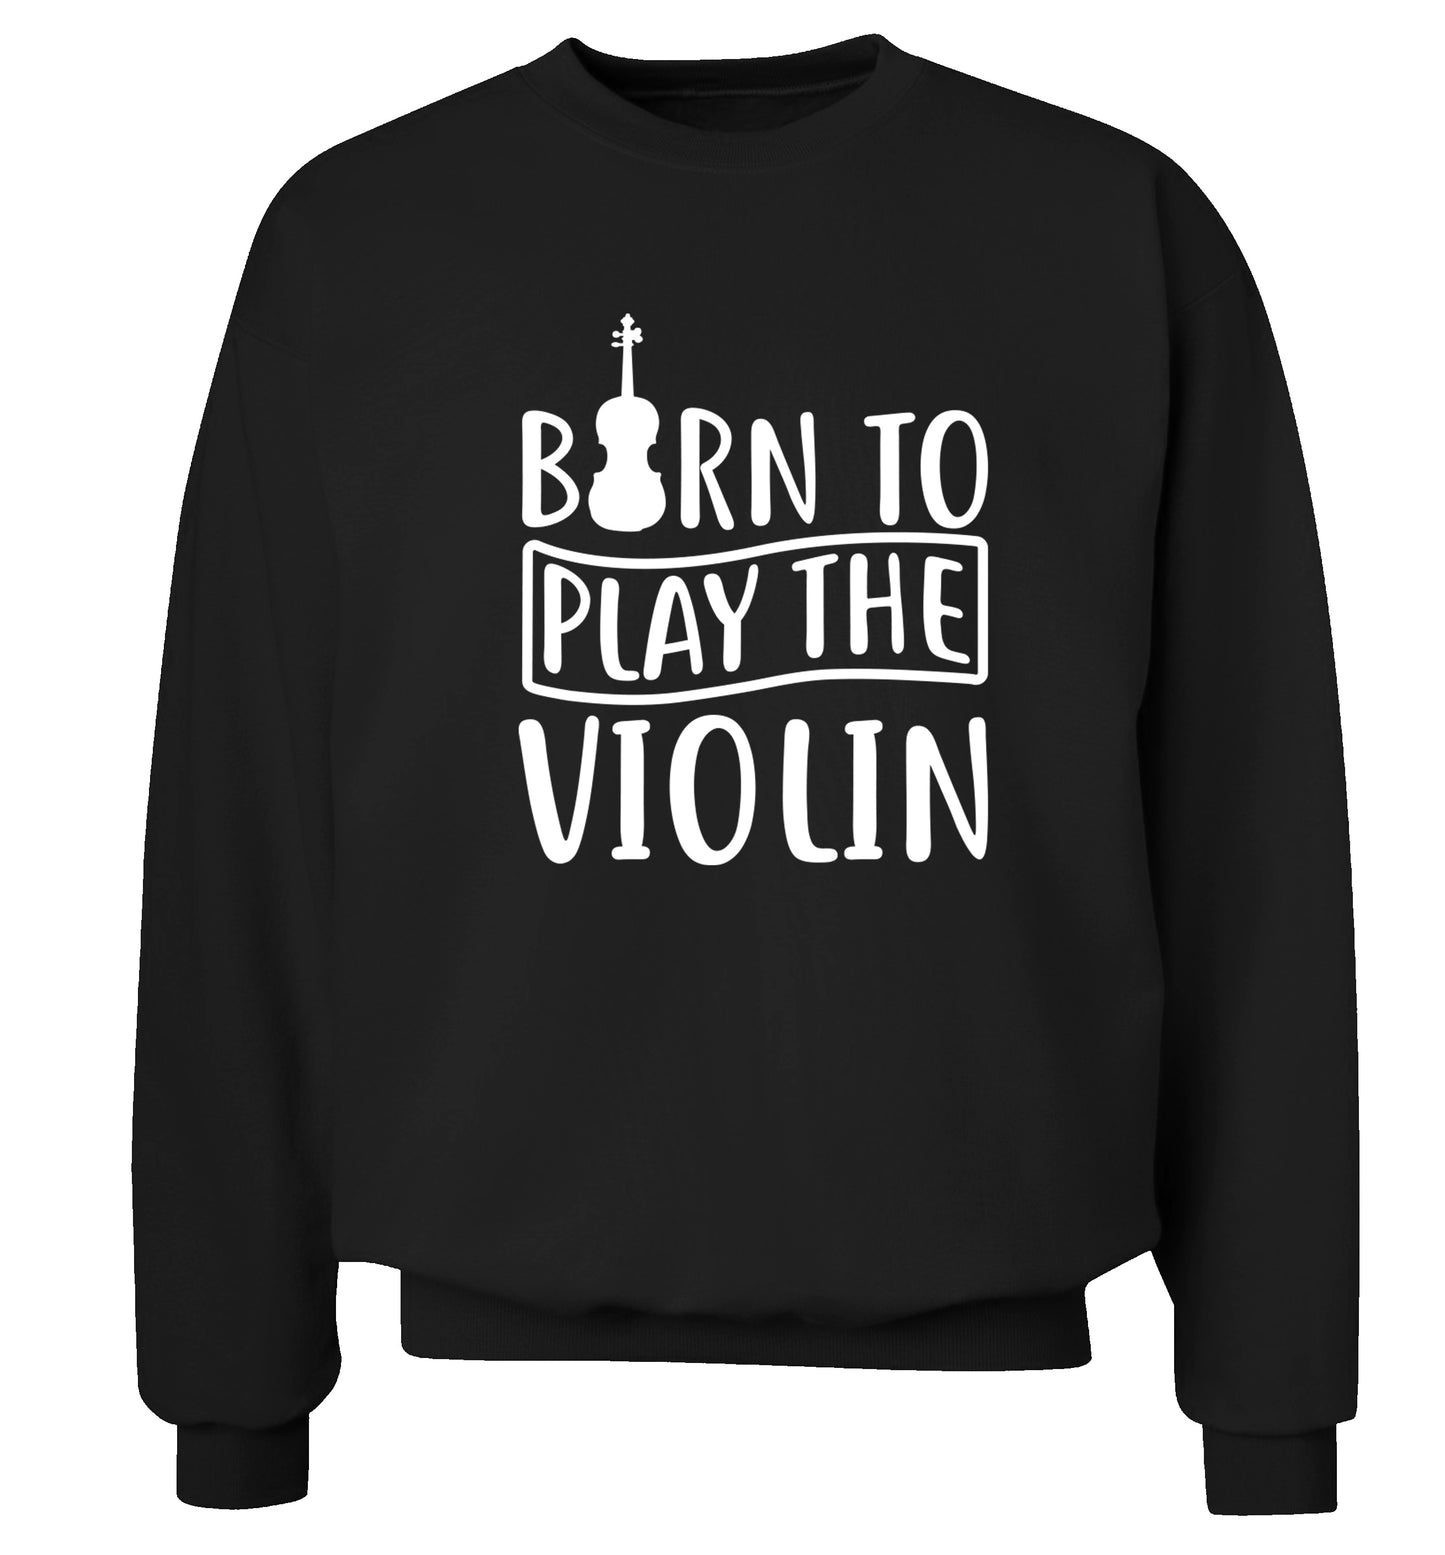 Born to Play the Violin Adult's unisex black Sweater 2XL